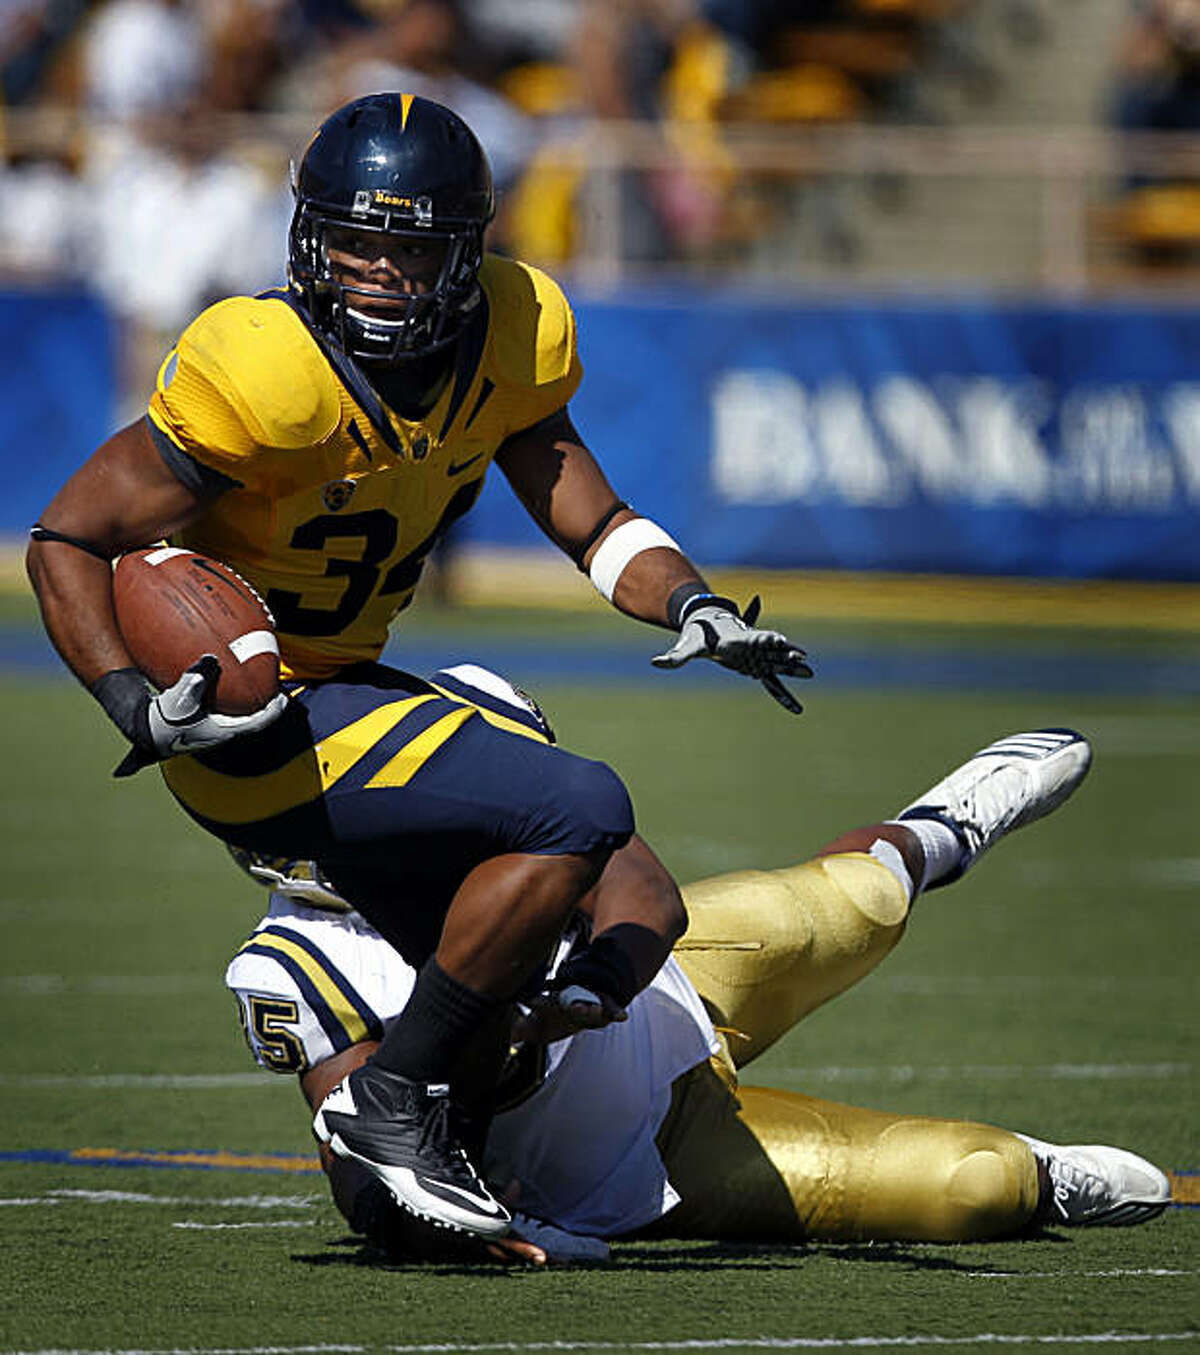 Shane Vereen picks up a first down after a pass reception in the second quarter of Cal's game against UCLA at Memorial Stadium in Berkeley on Saturday.